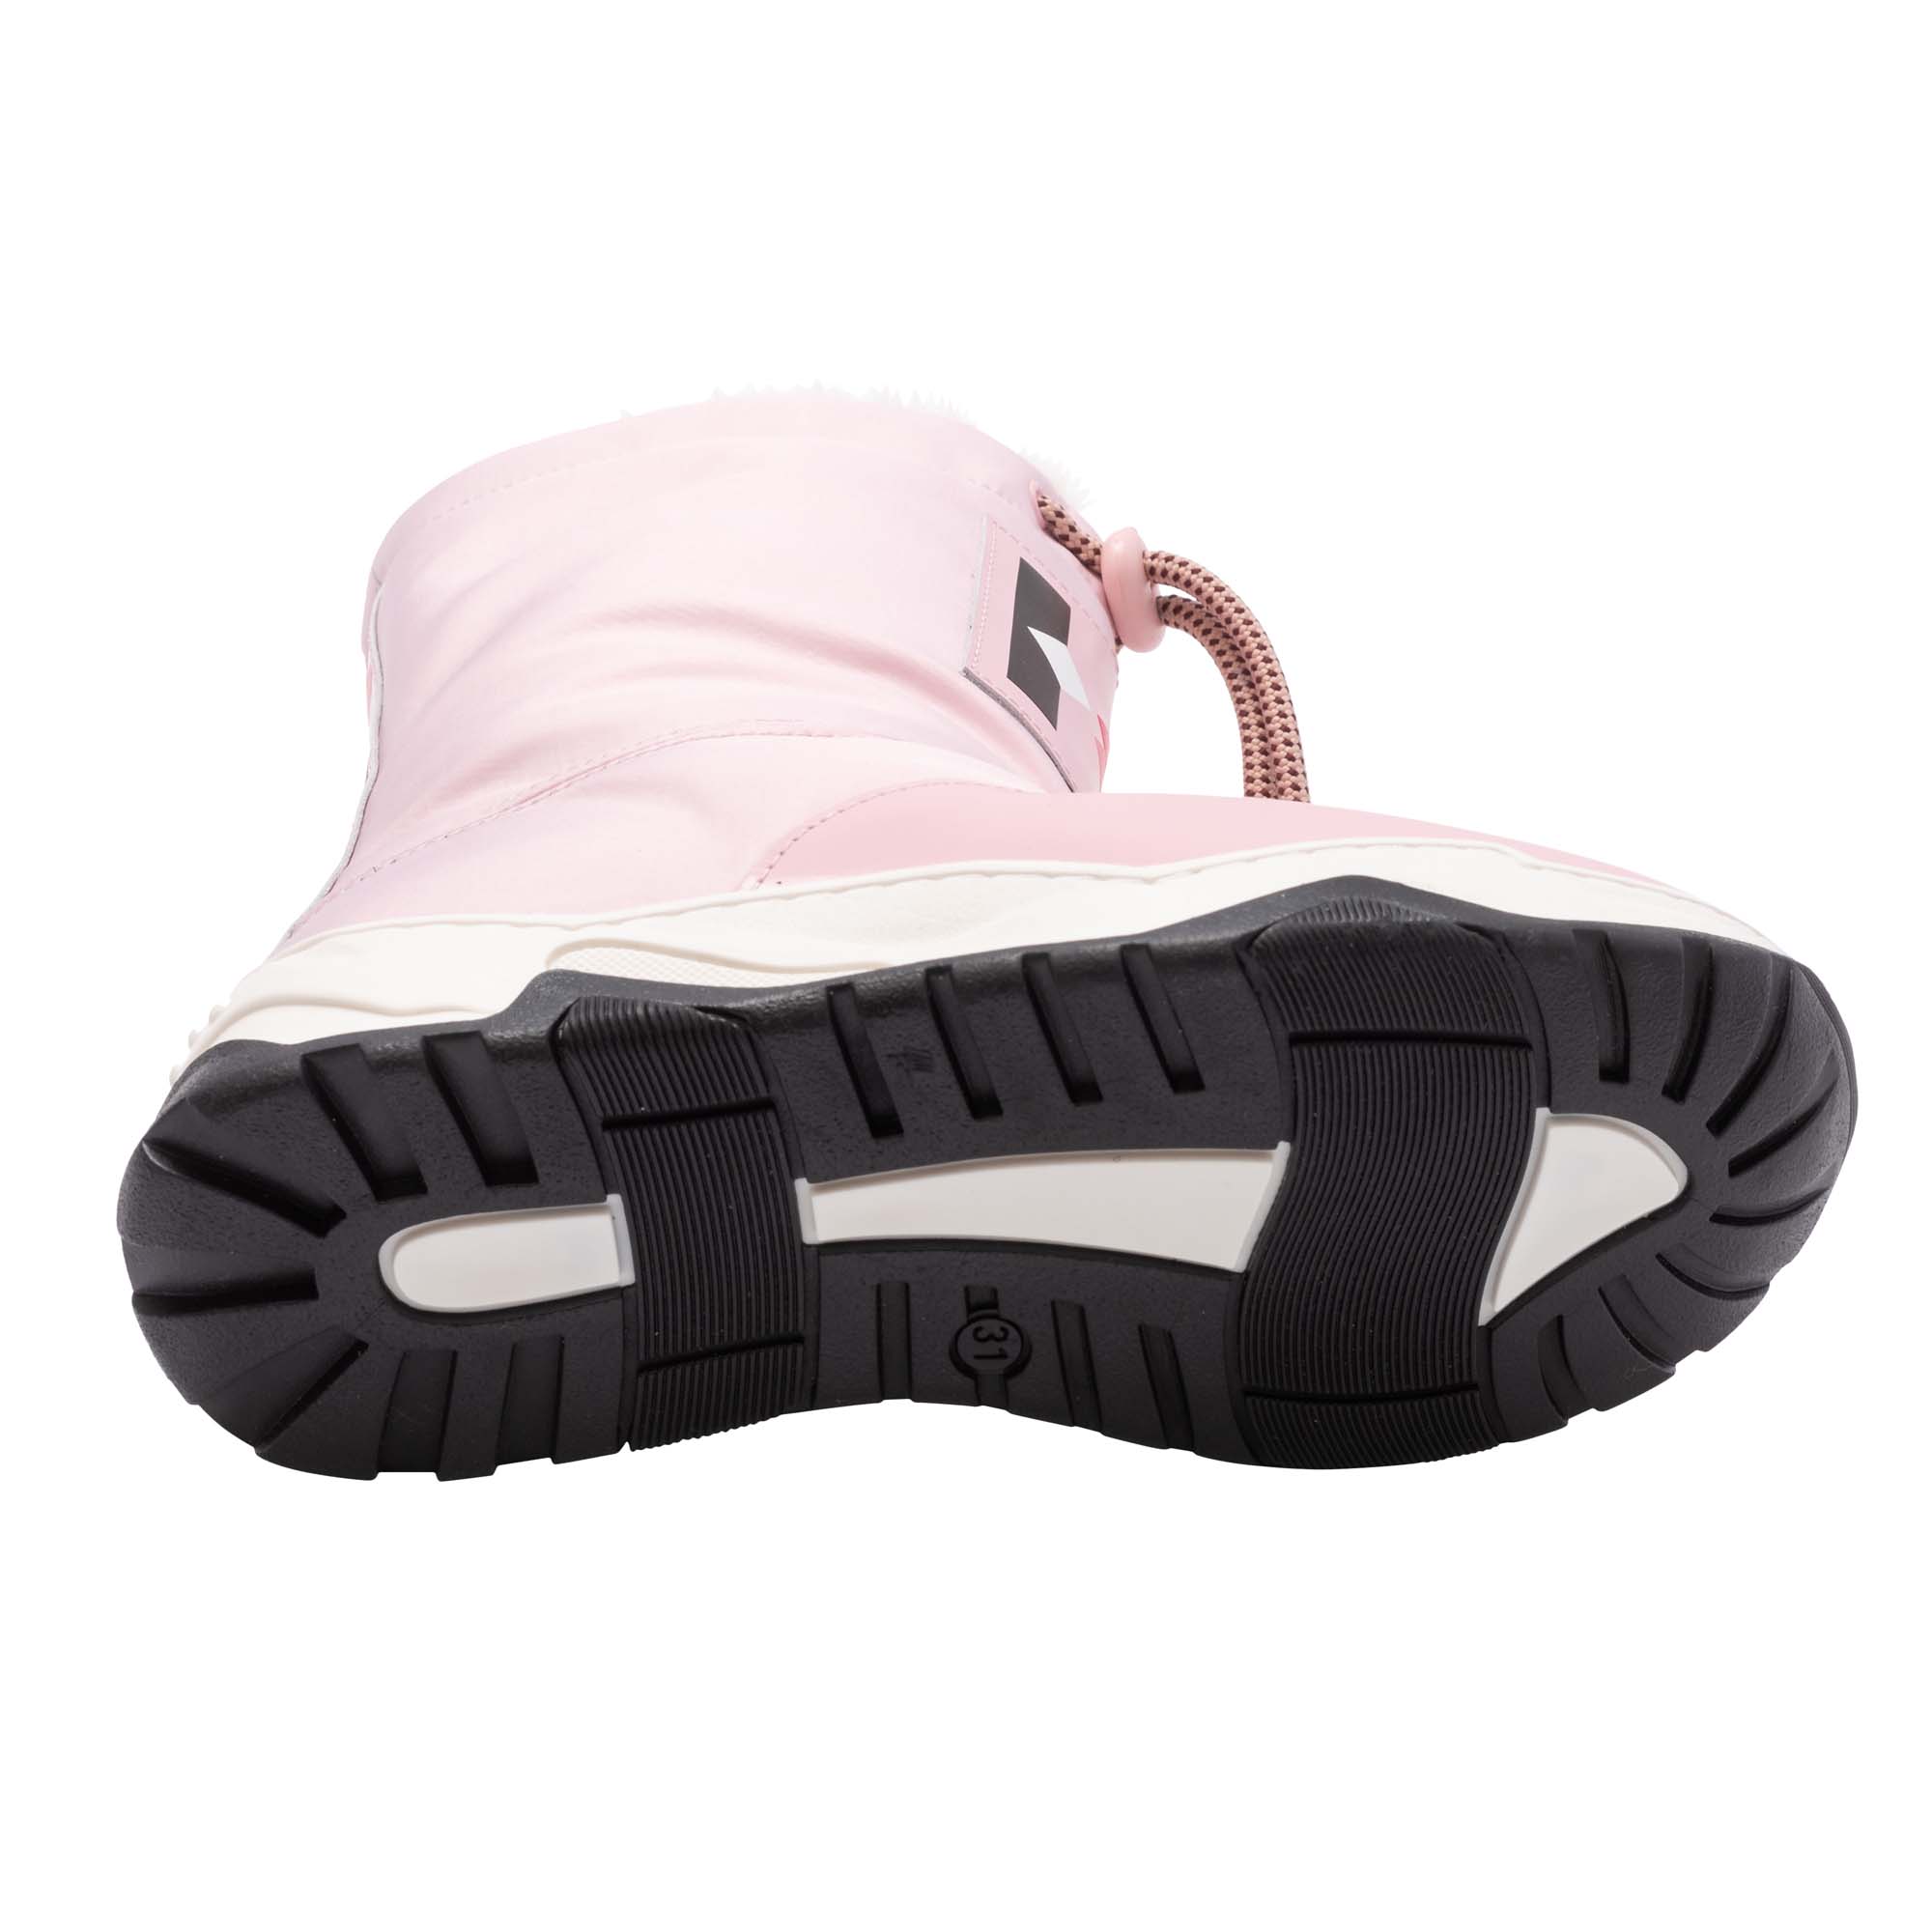 Snow boots KENZO KIDS for GIRL